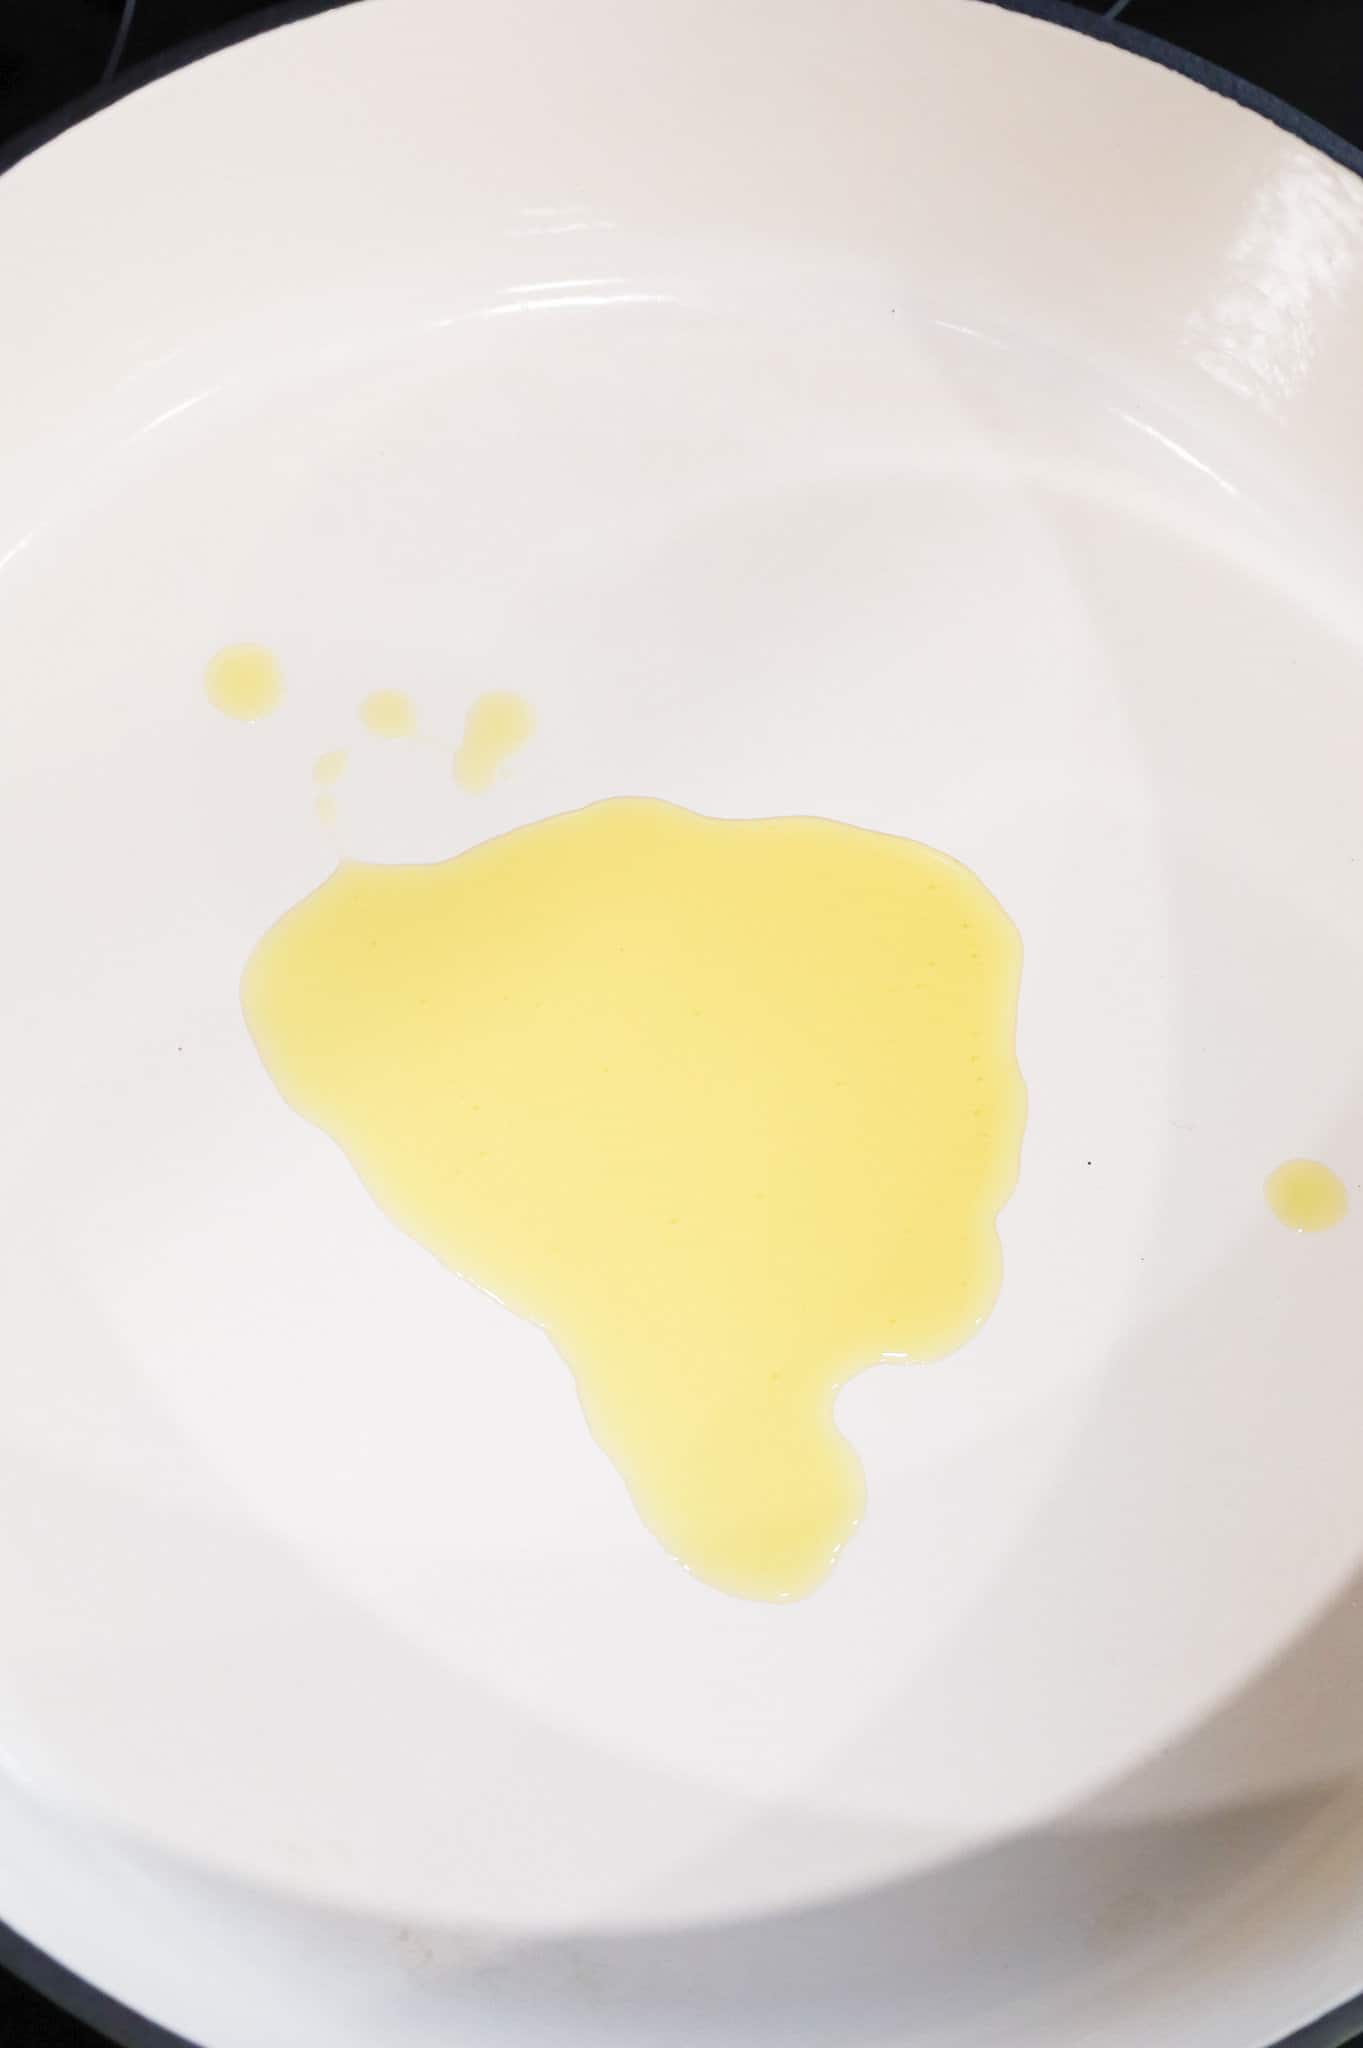 olive oil added to a skillet